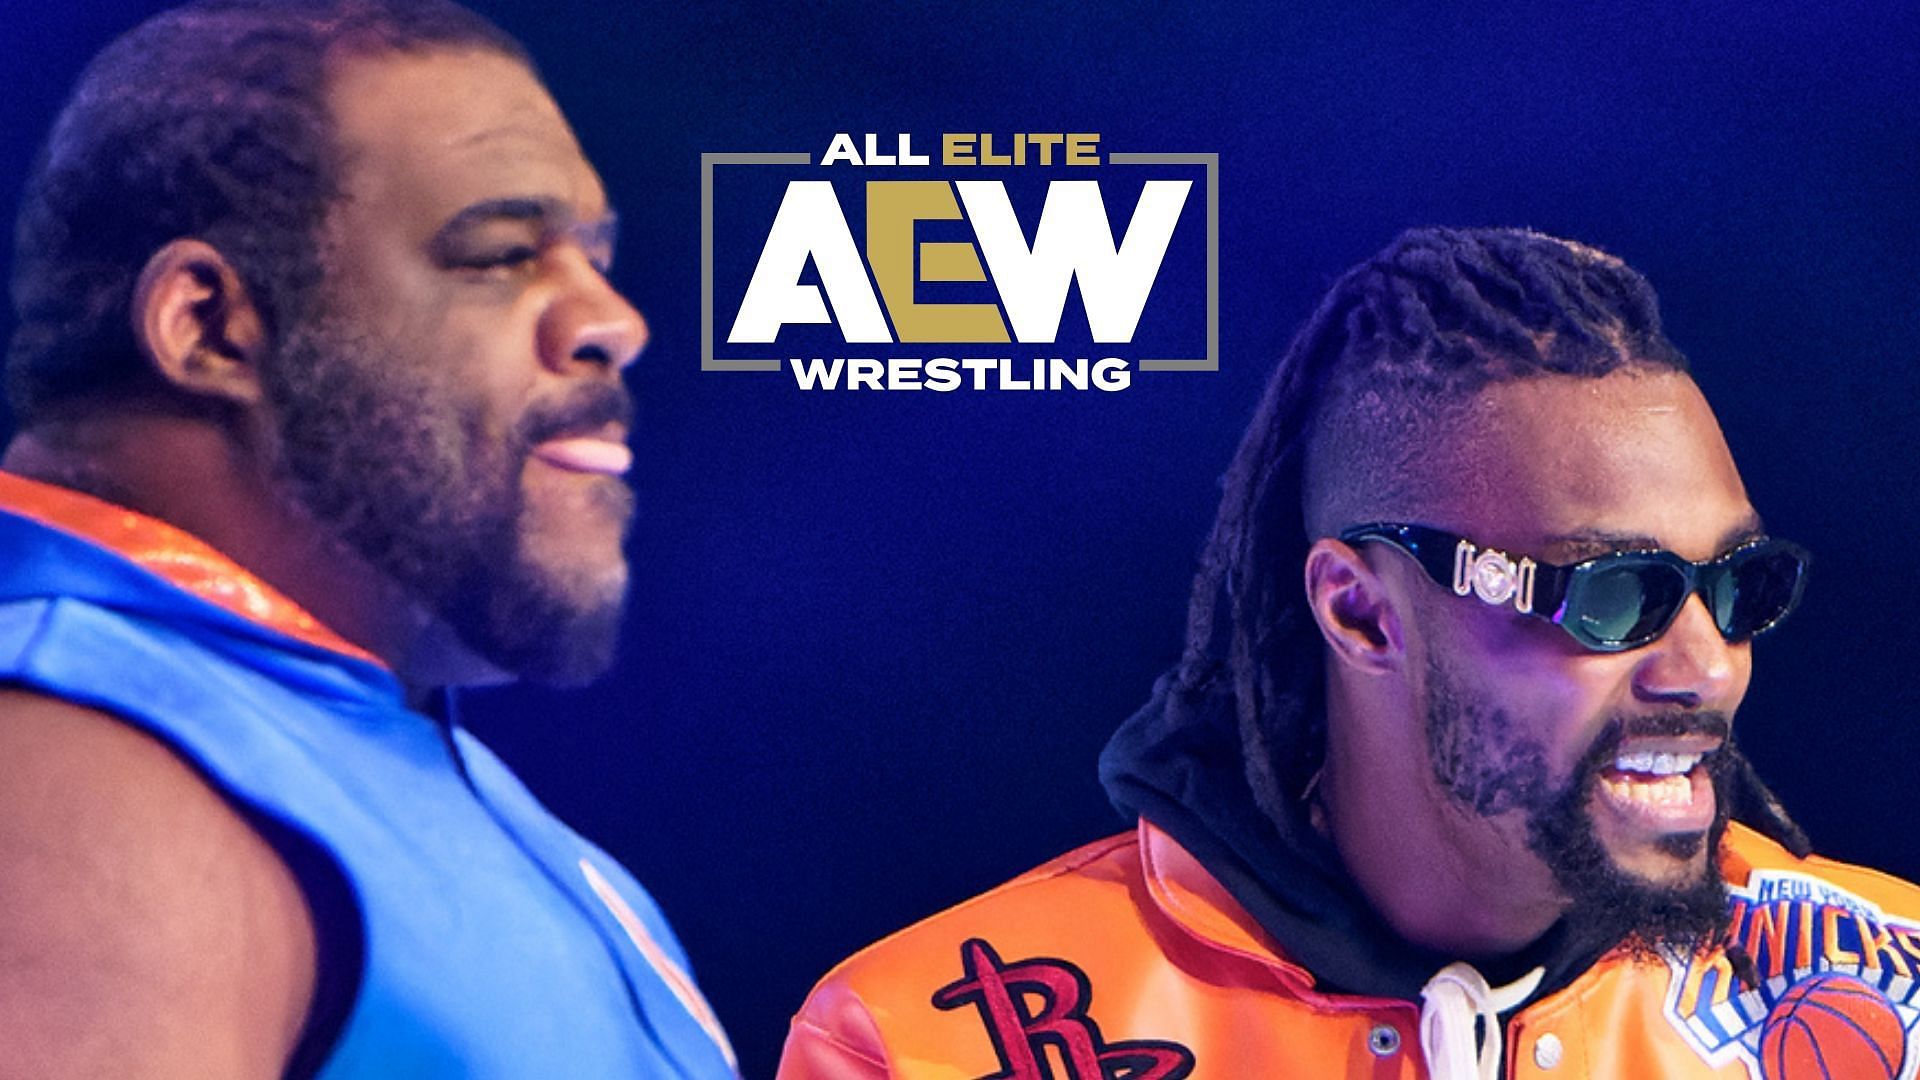 There has been an update on Swerve Strickland and Keith Lee